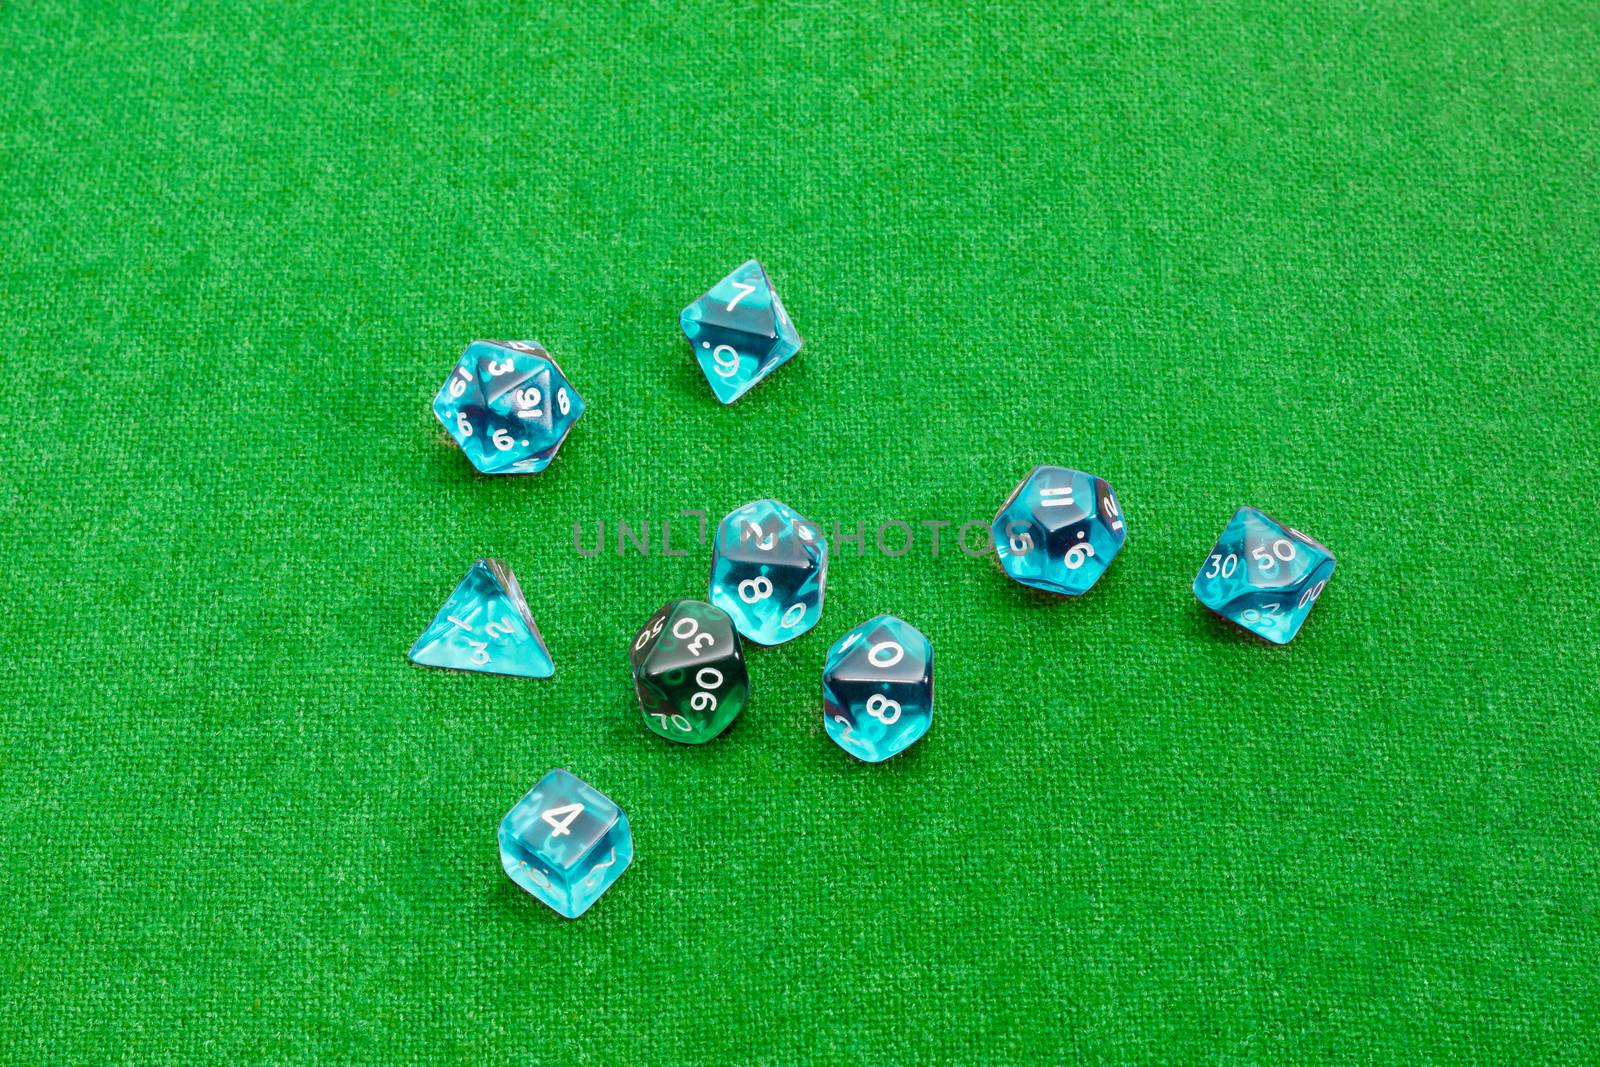 Set of blue and green specialized polyhedral dice with numbers used in role-playing games on a table with green cloth
